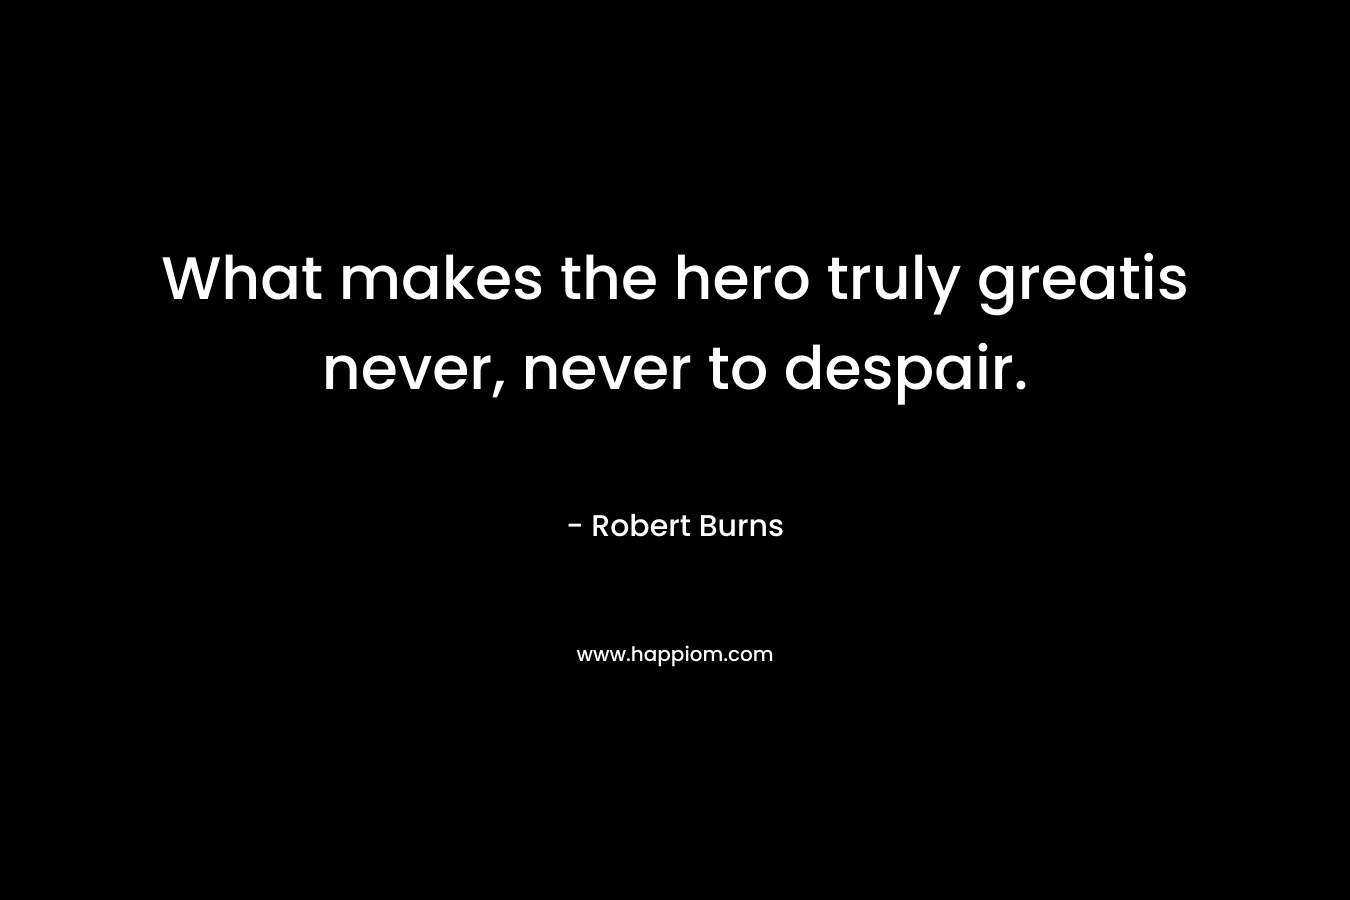 What makes the hero truly greatis never, never to despair.